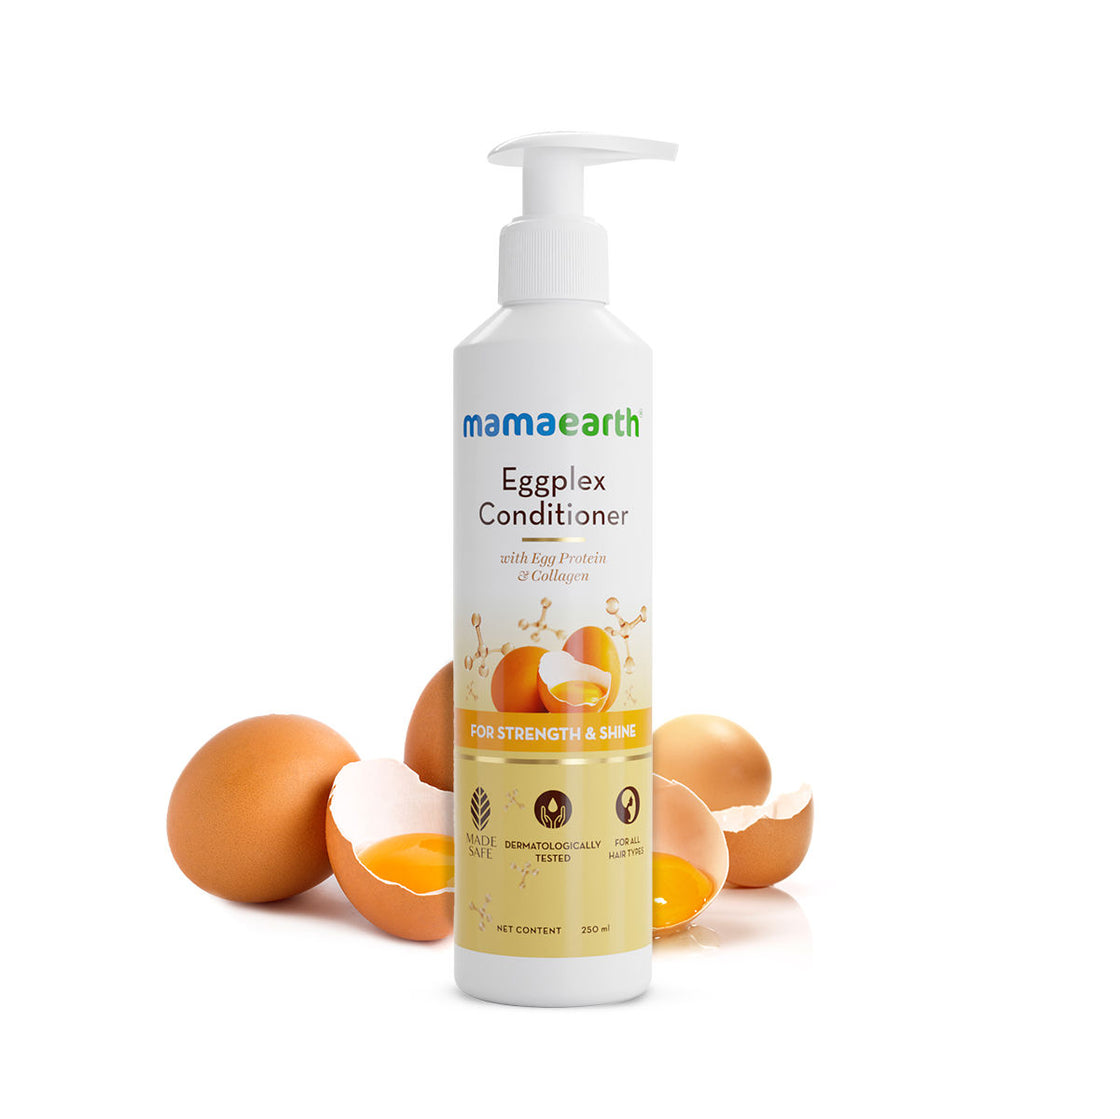 Mamaearth Eggplex Conditioner With Egg Protein & Collagen For Strength & Shine-2